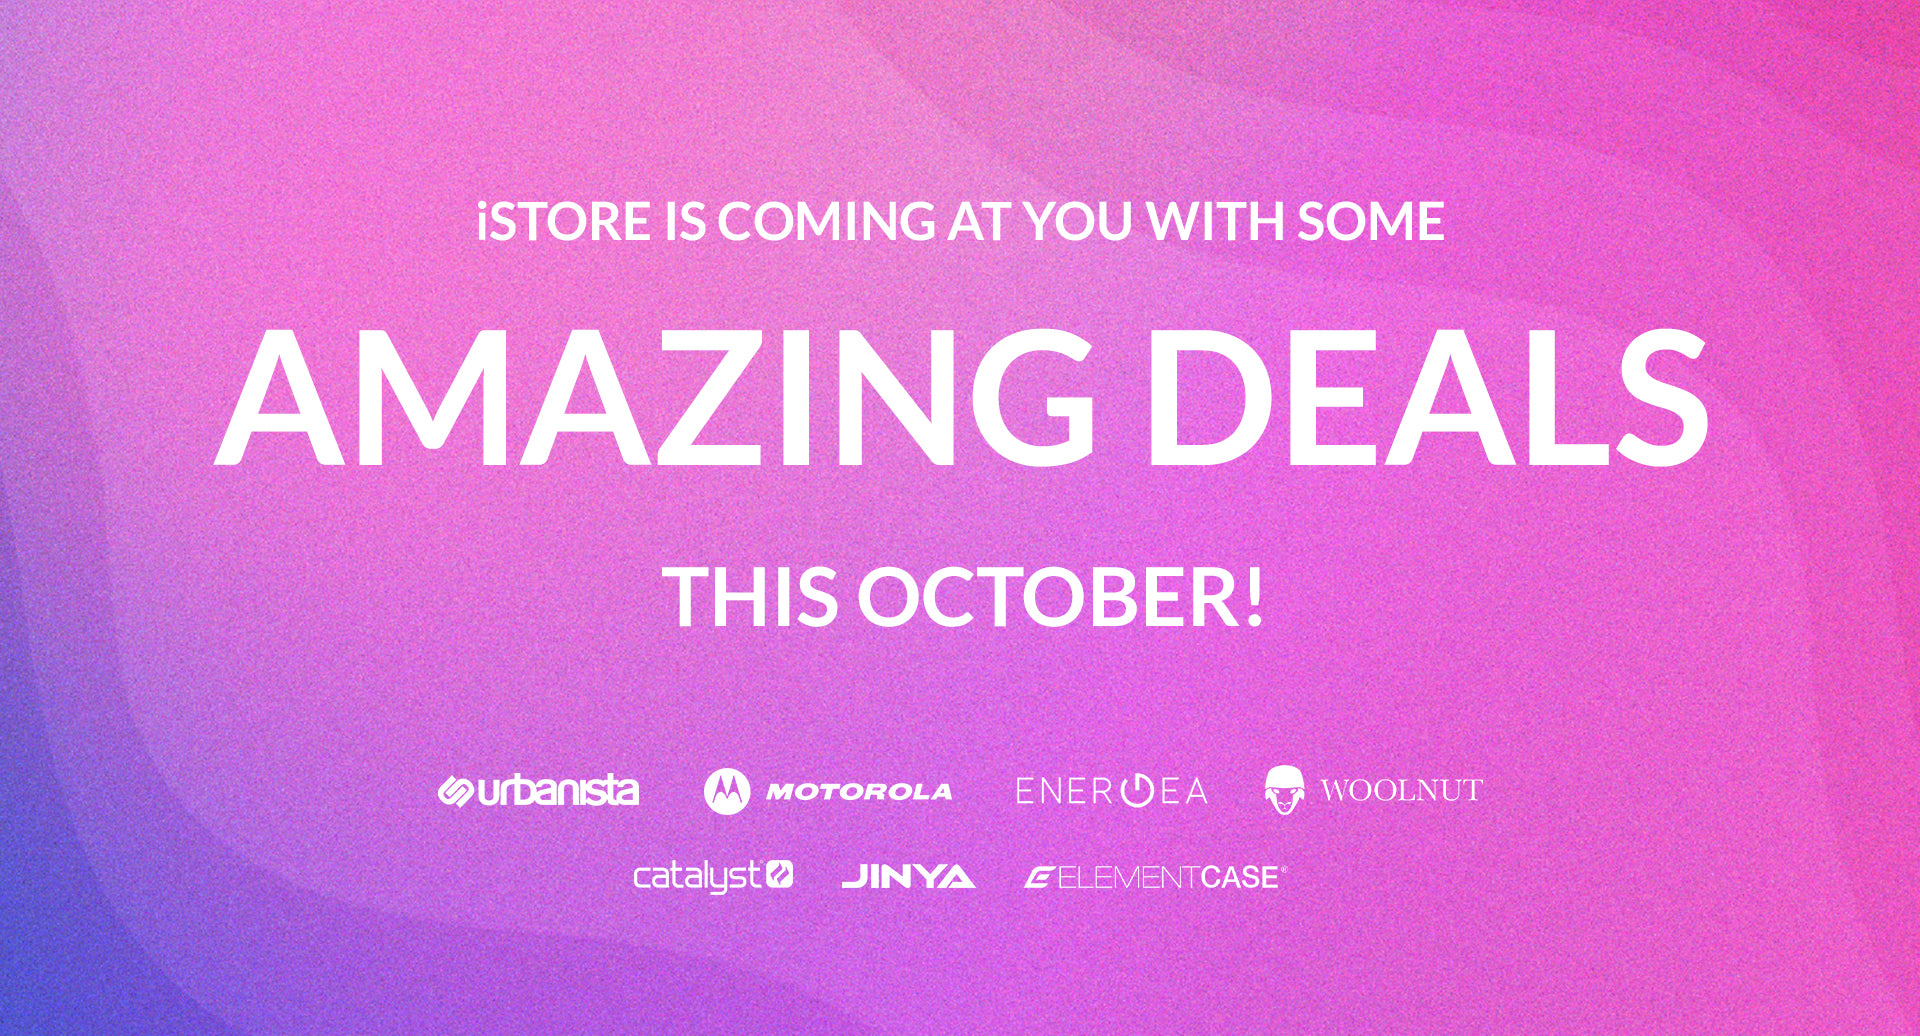 All the amazing deals for October!